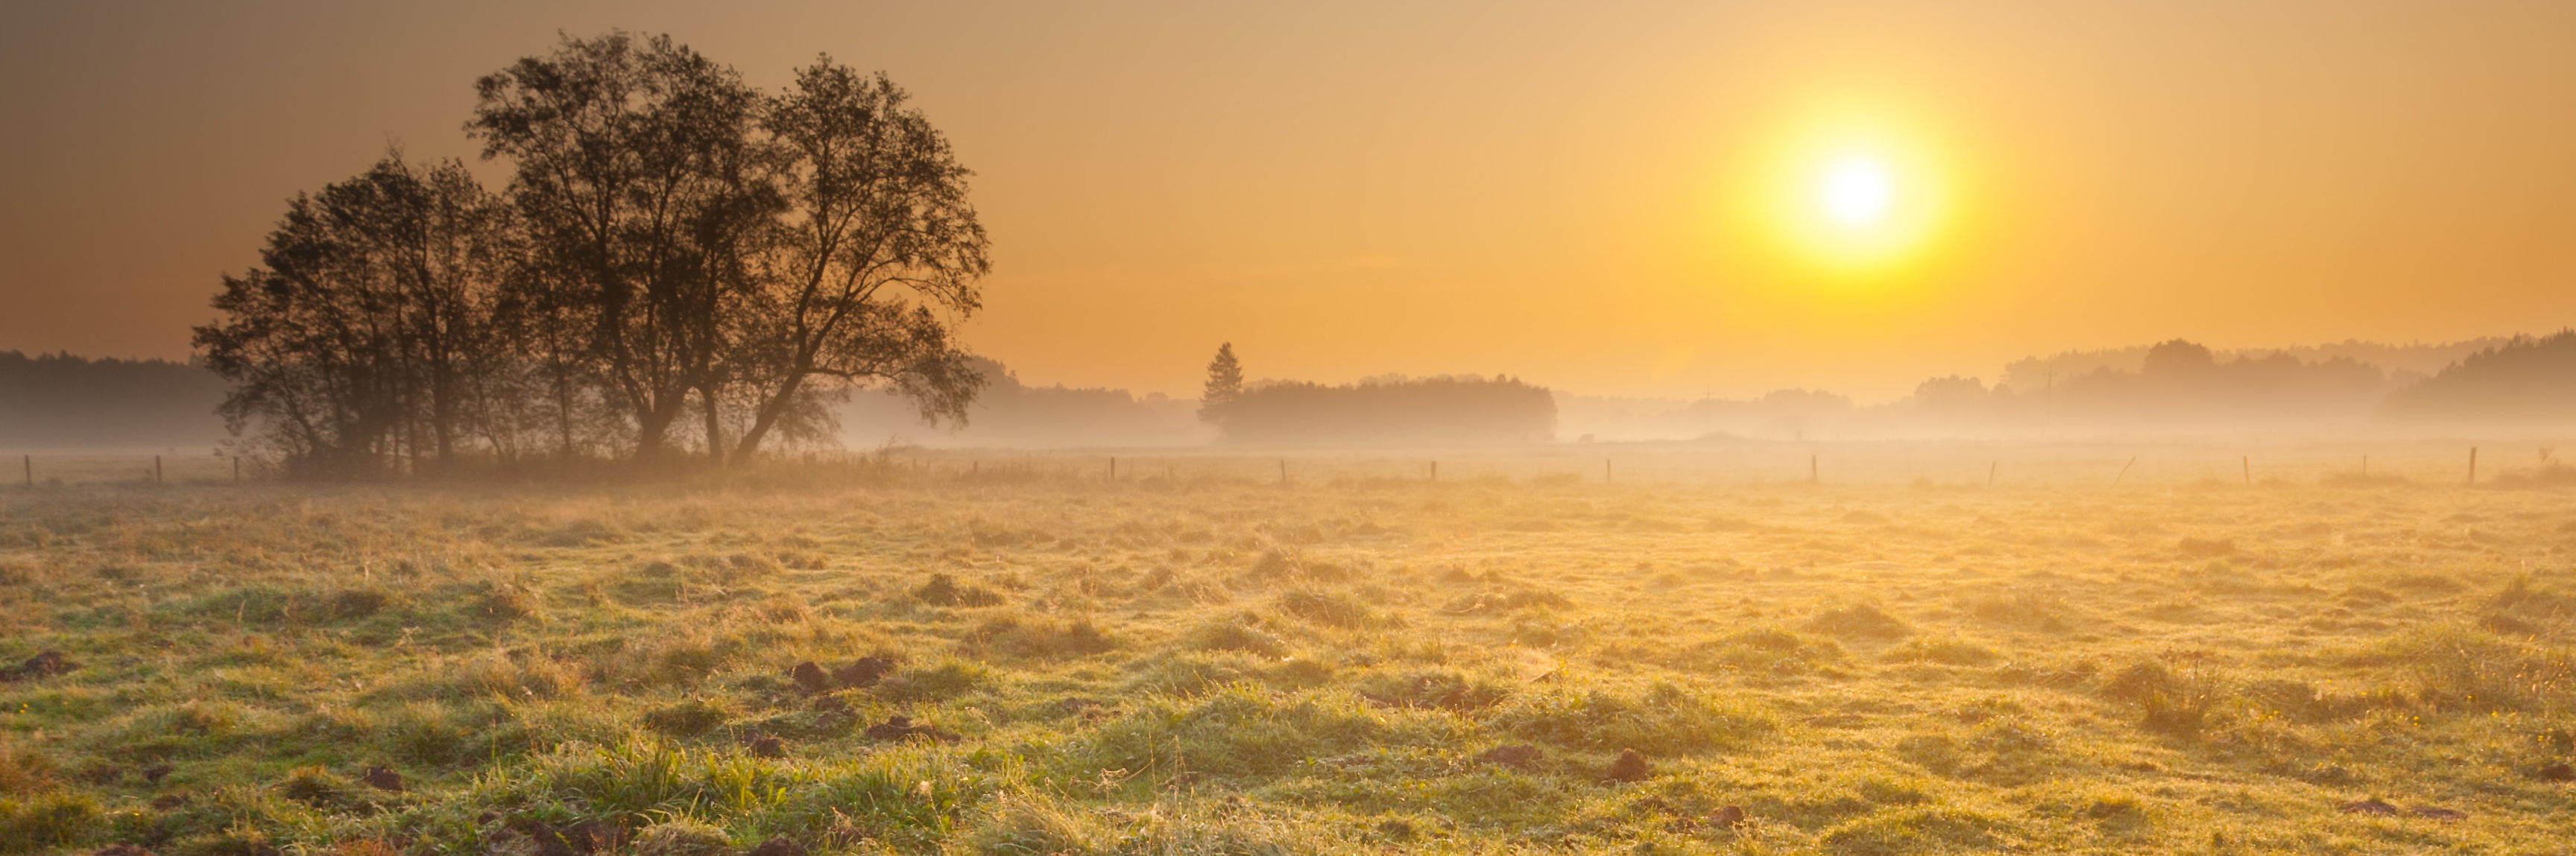 Sunrise over a foggy meadow and trees